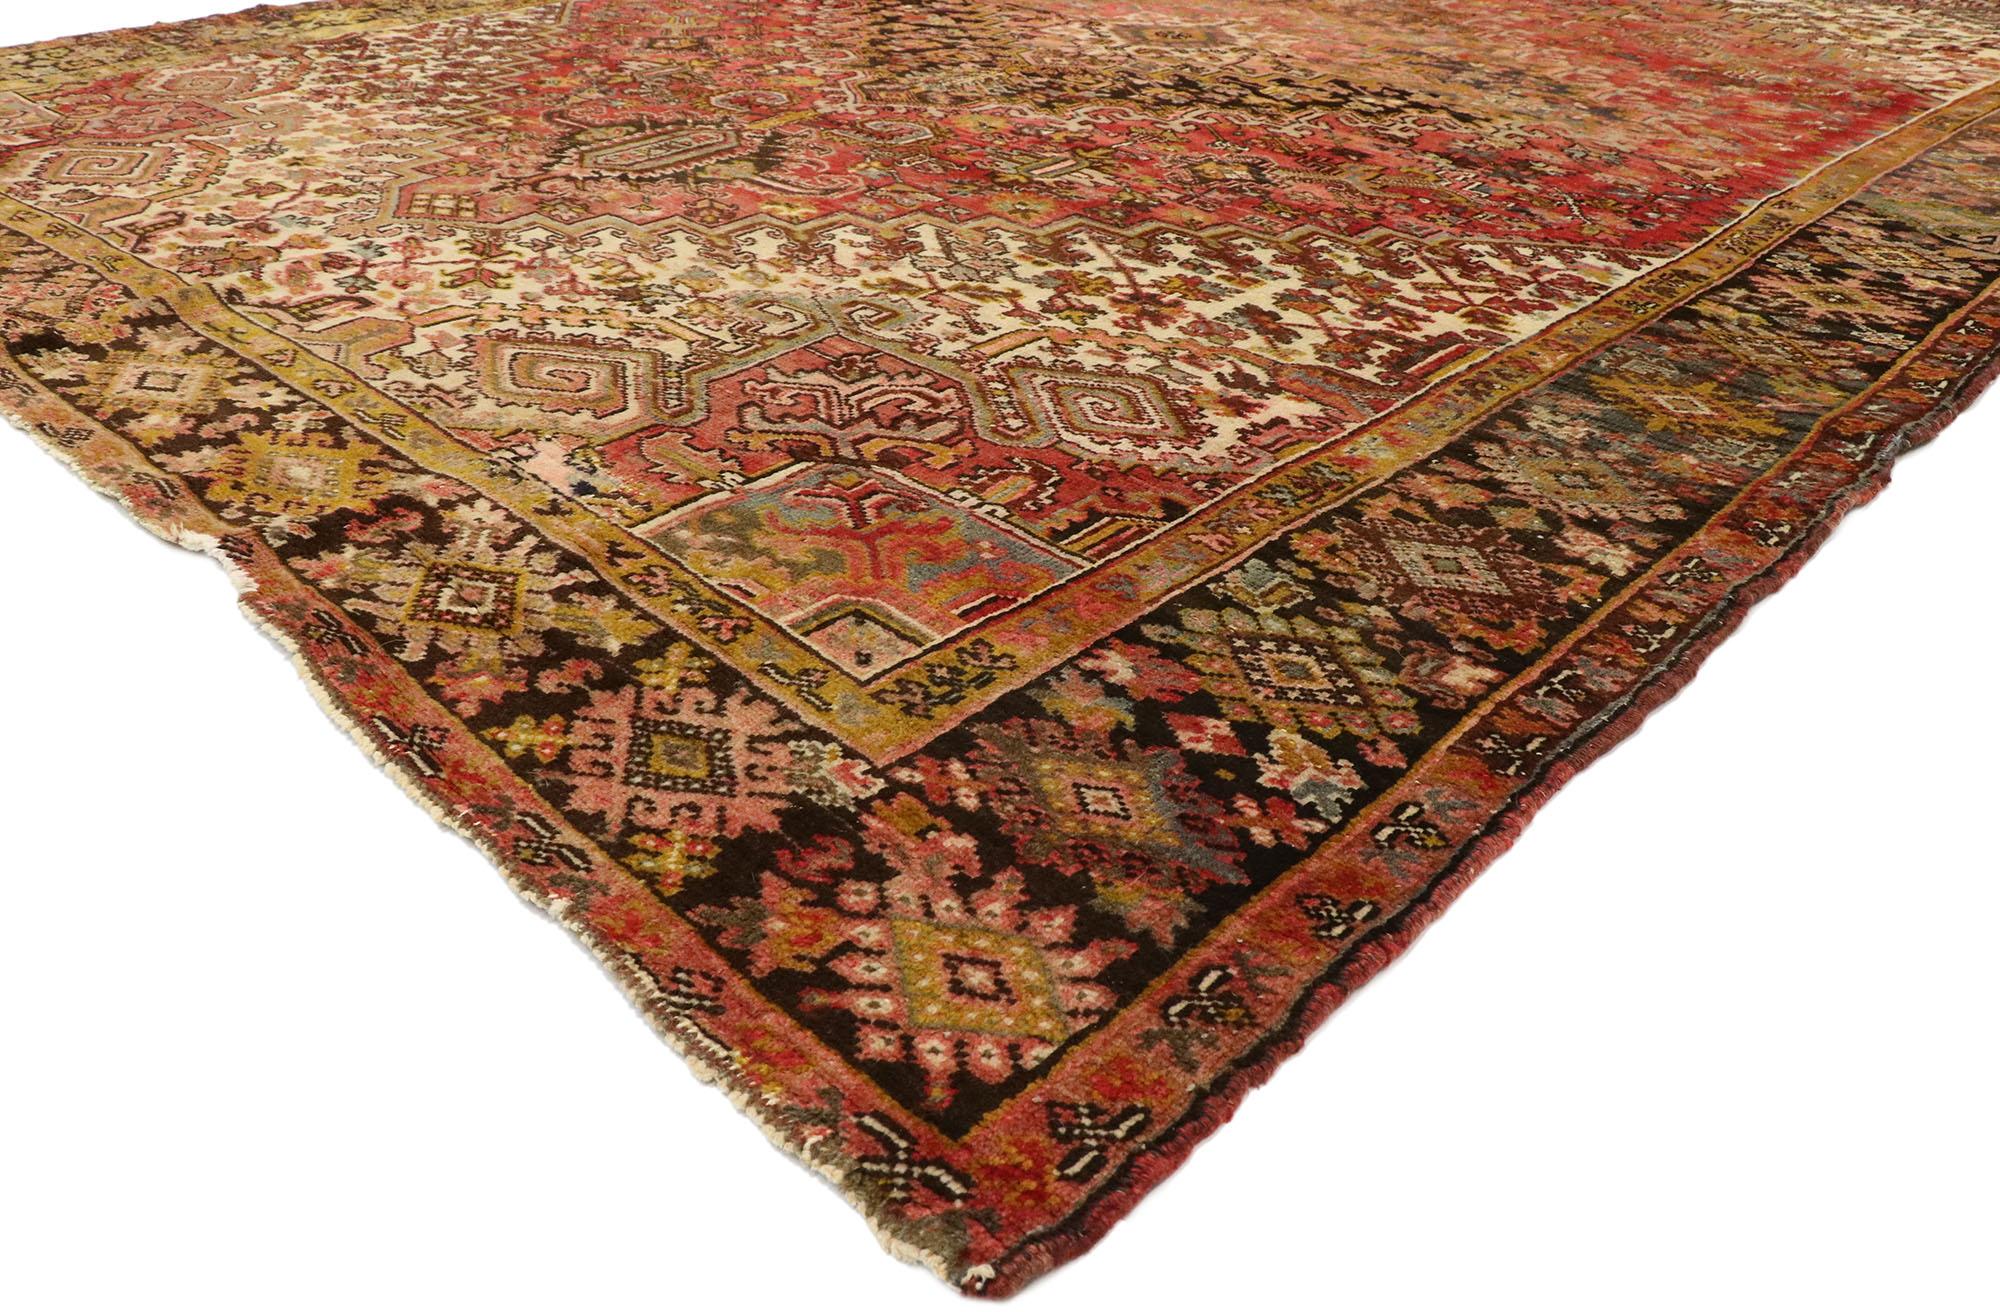 77483, antique Persian Heriz Area rug with Mid-Century Modern style. With timeless appeal, refined colors, and architectural design elements, this hand knotted wool antique Persian Heriz rug can beautifully blend modern, contemporary, and